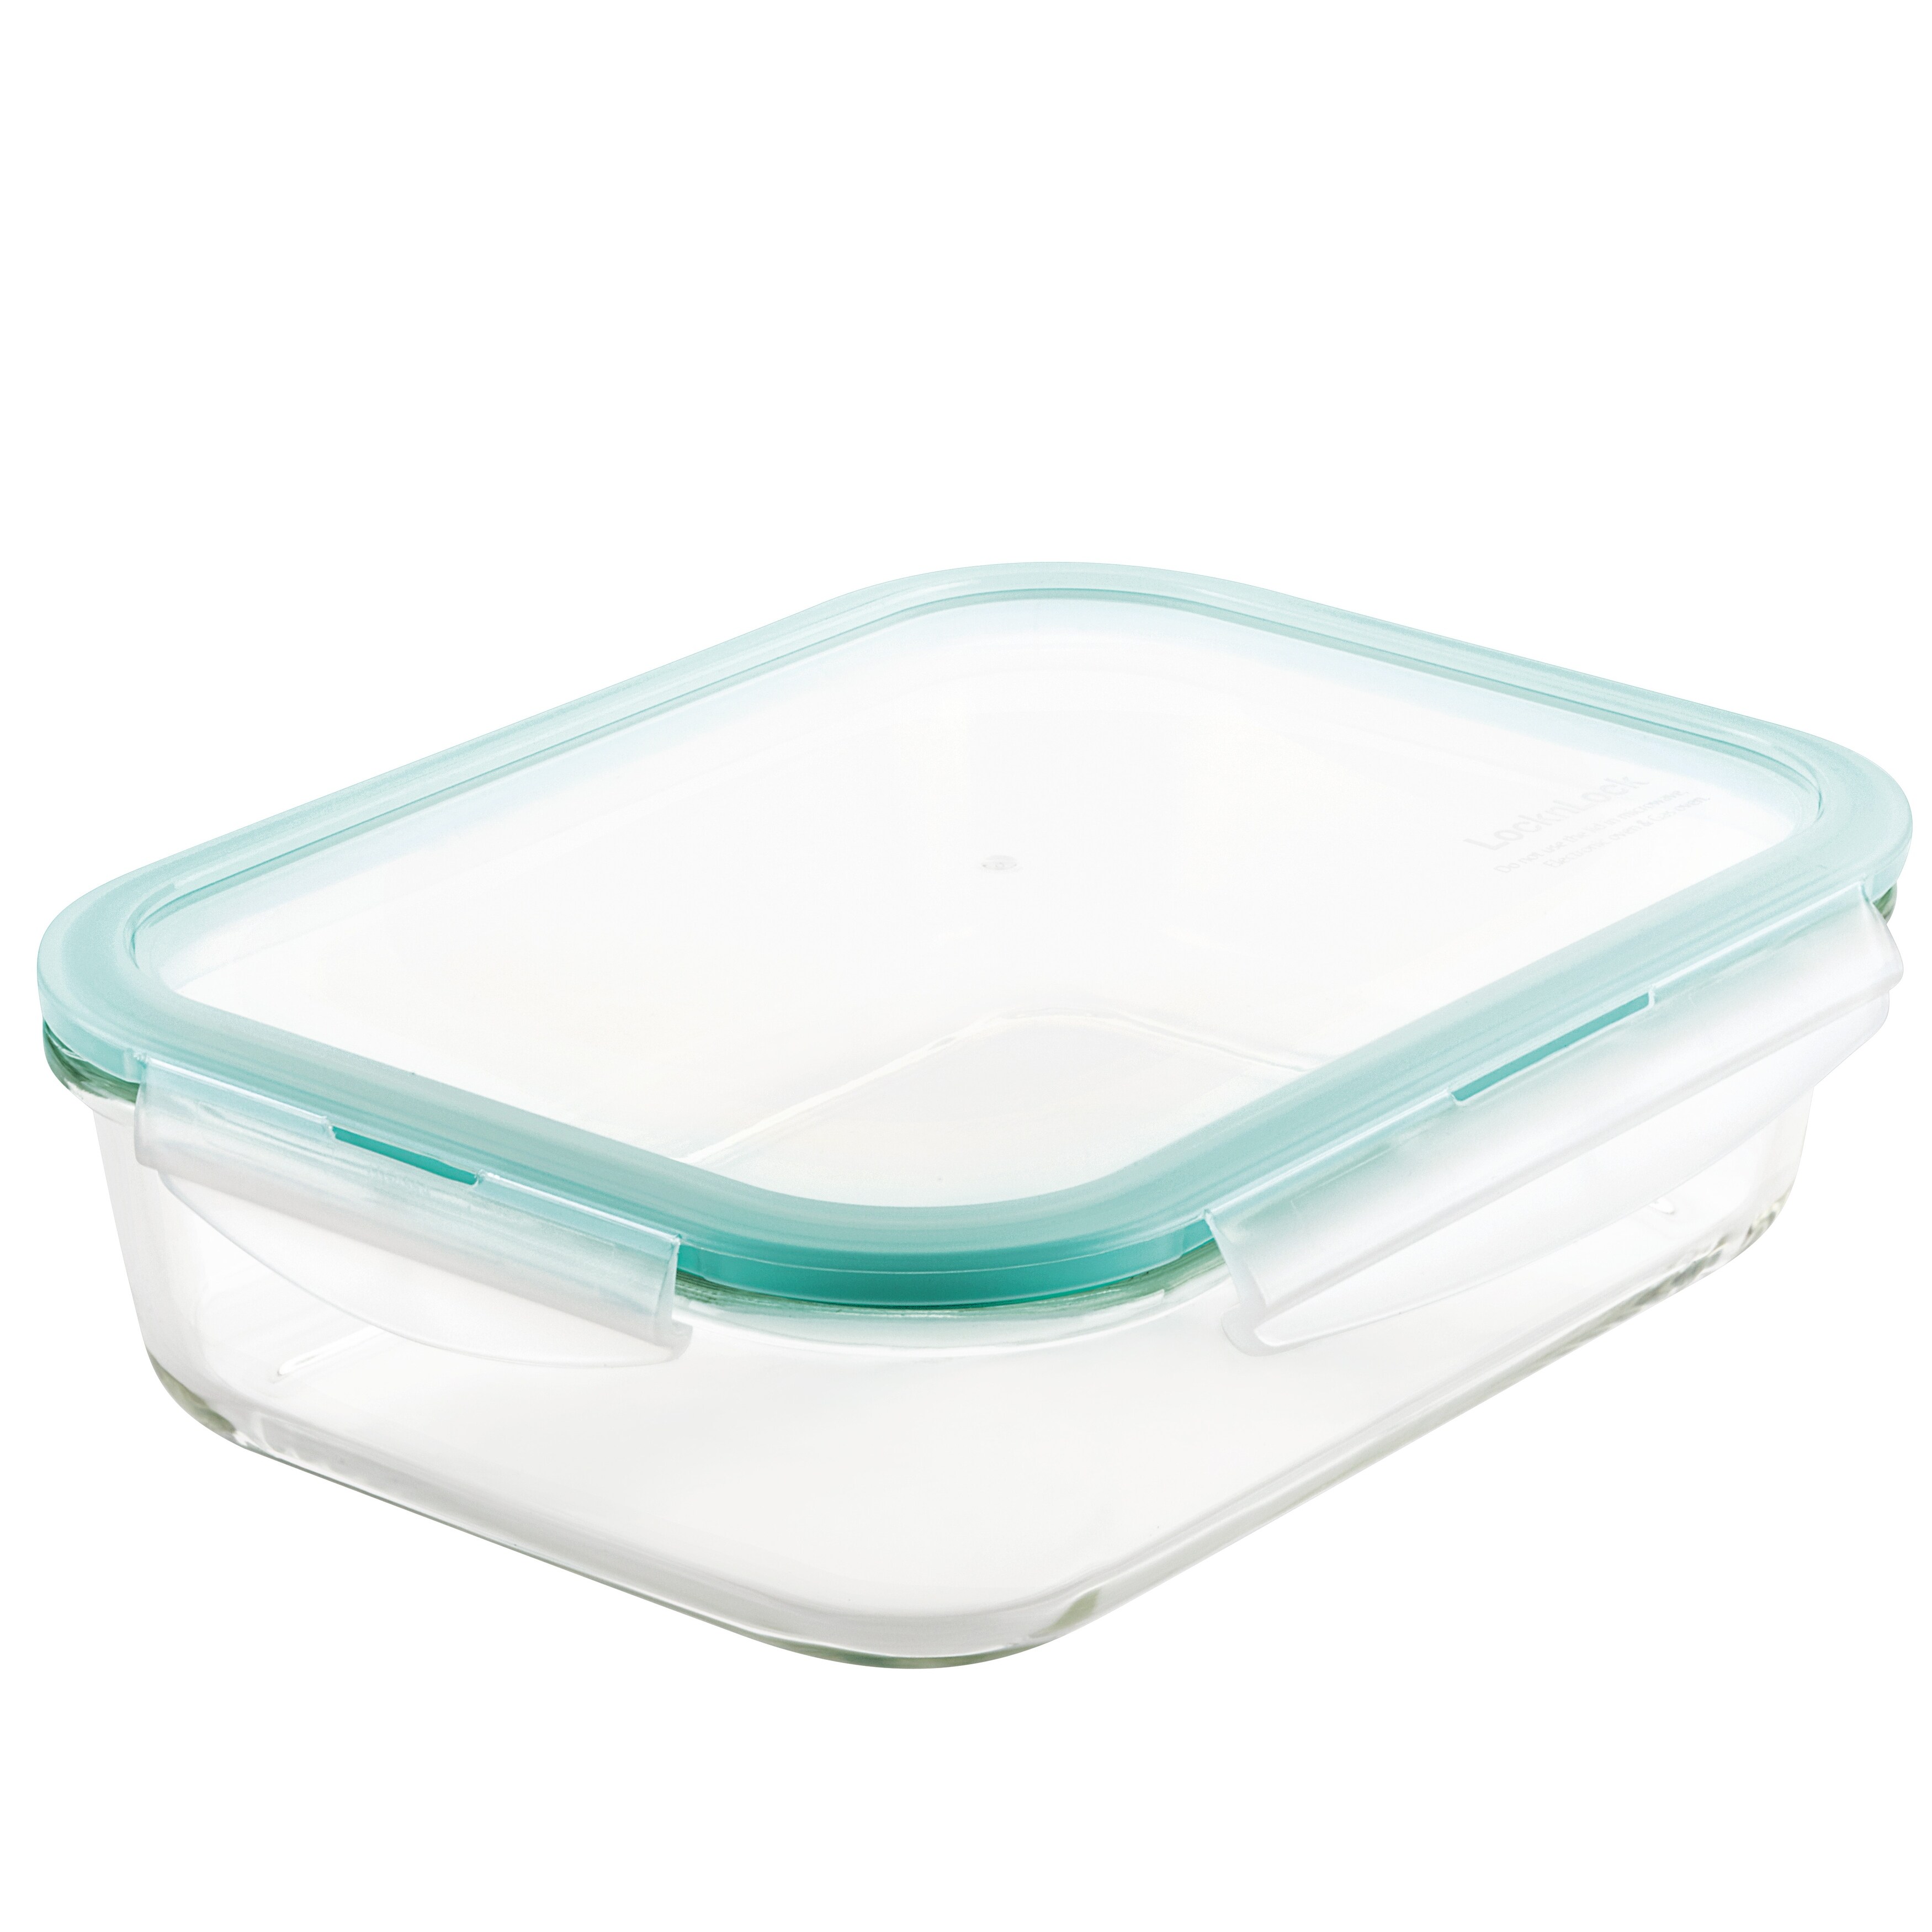 https://ak1.ostkcdn.com/images/products/is/images/direct/07307be776632cc0d39b27680a9e9f0fe722f881/LocknLock-Purely-Better-Glass-Rectangular-Food-Storage-Containers%2C-51-Ounce%2C-Set-of-Two.jpg